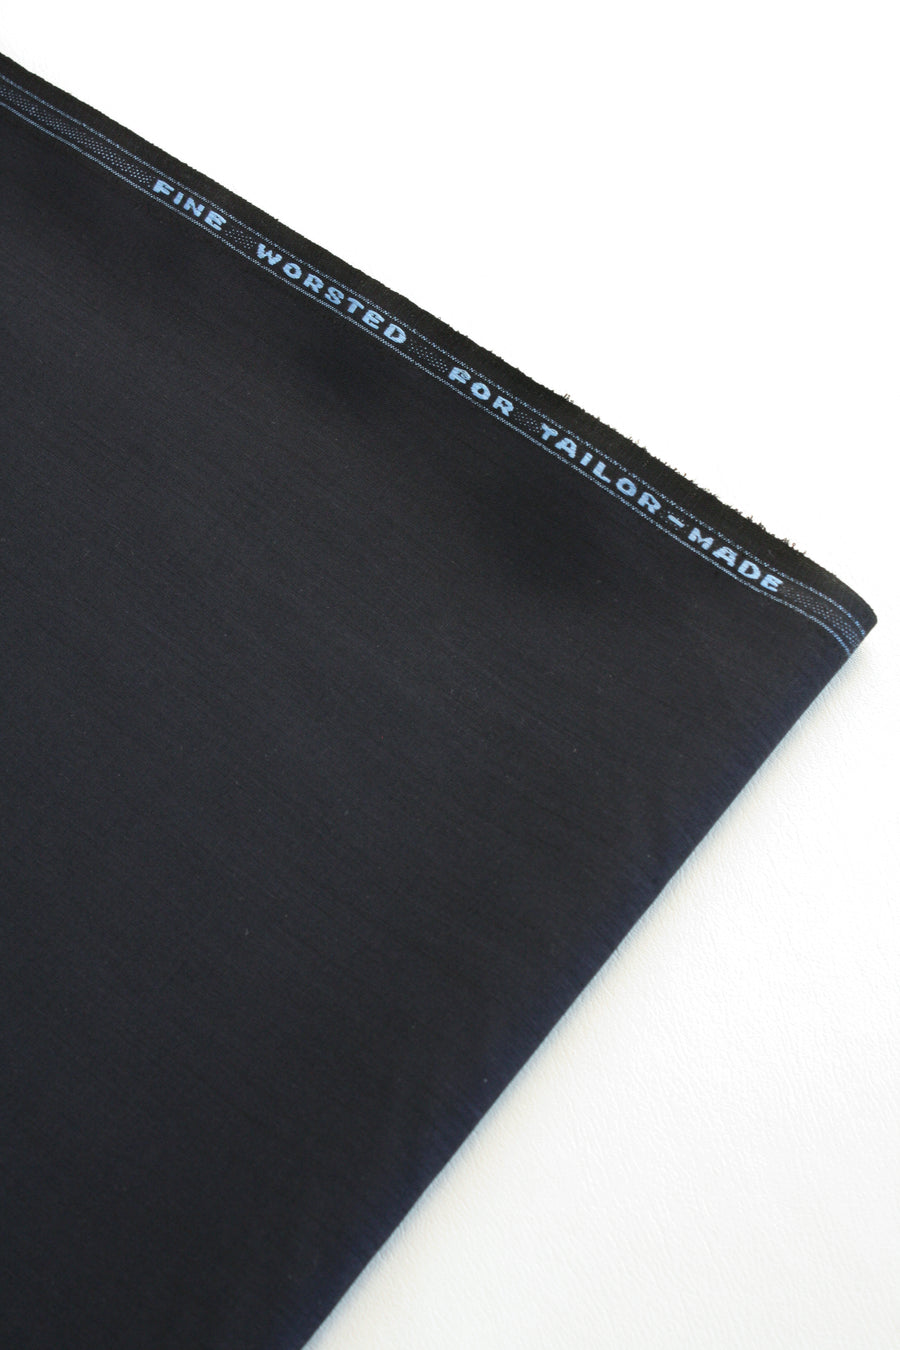 L.V Suiting #9 - Fine Worsted Wool Silk | Midnight